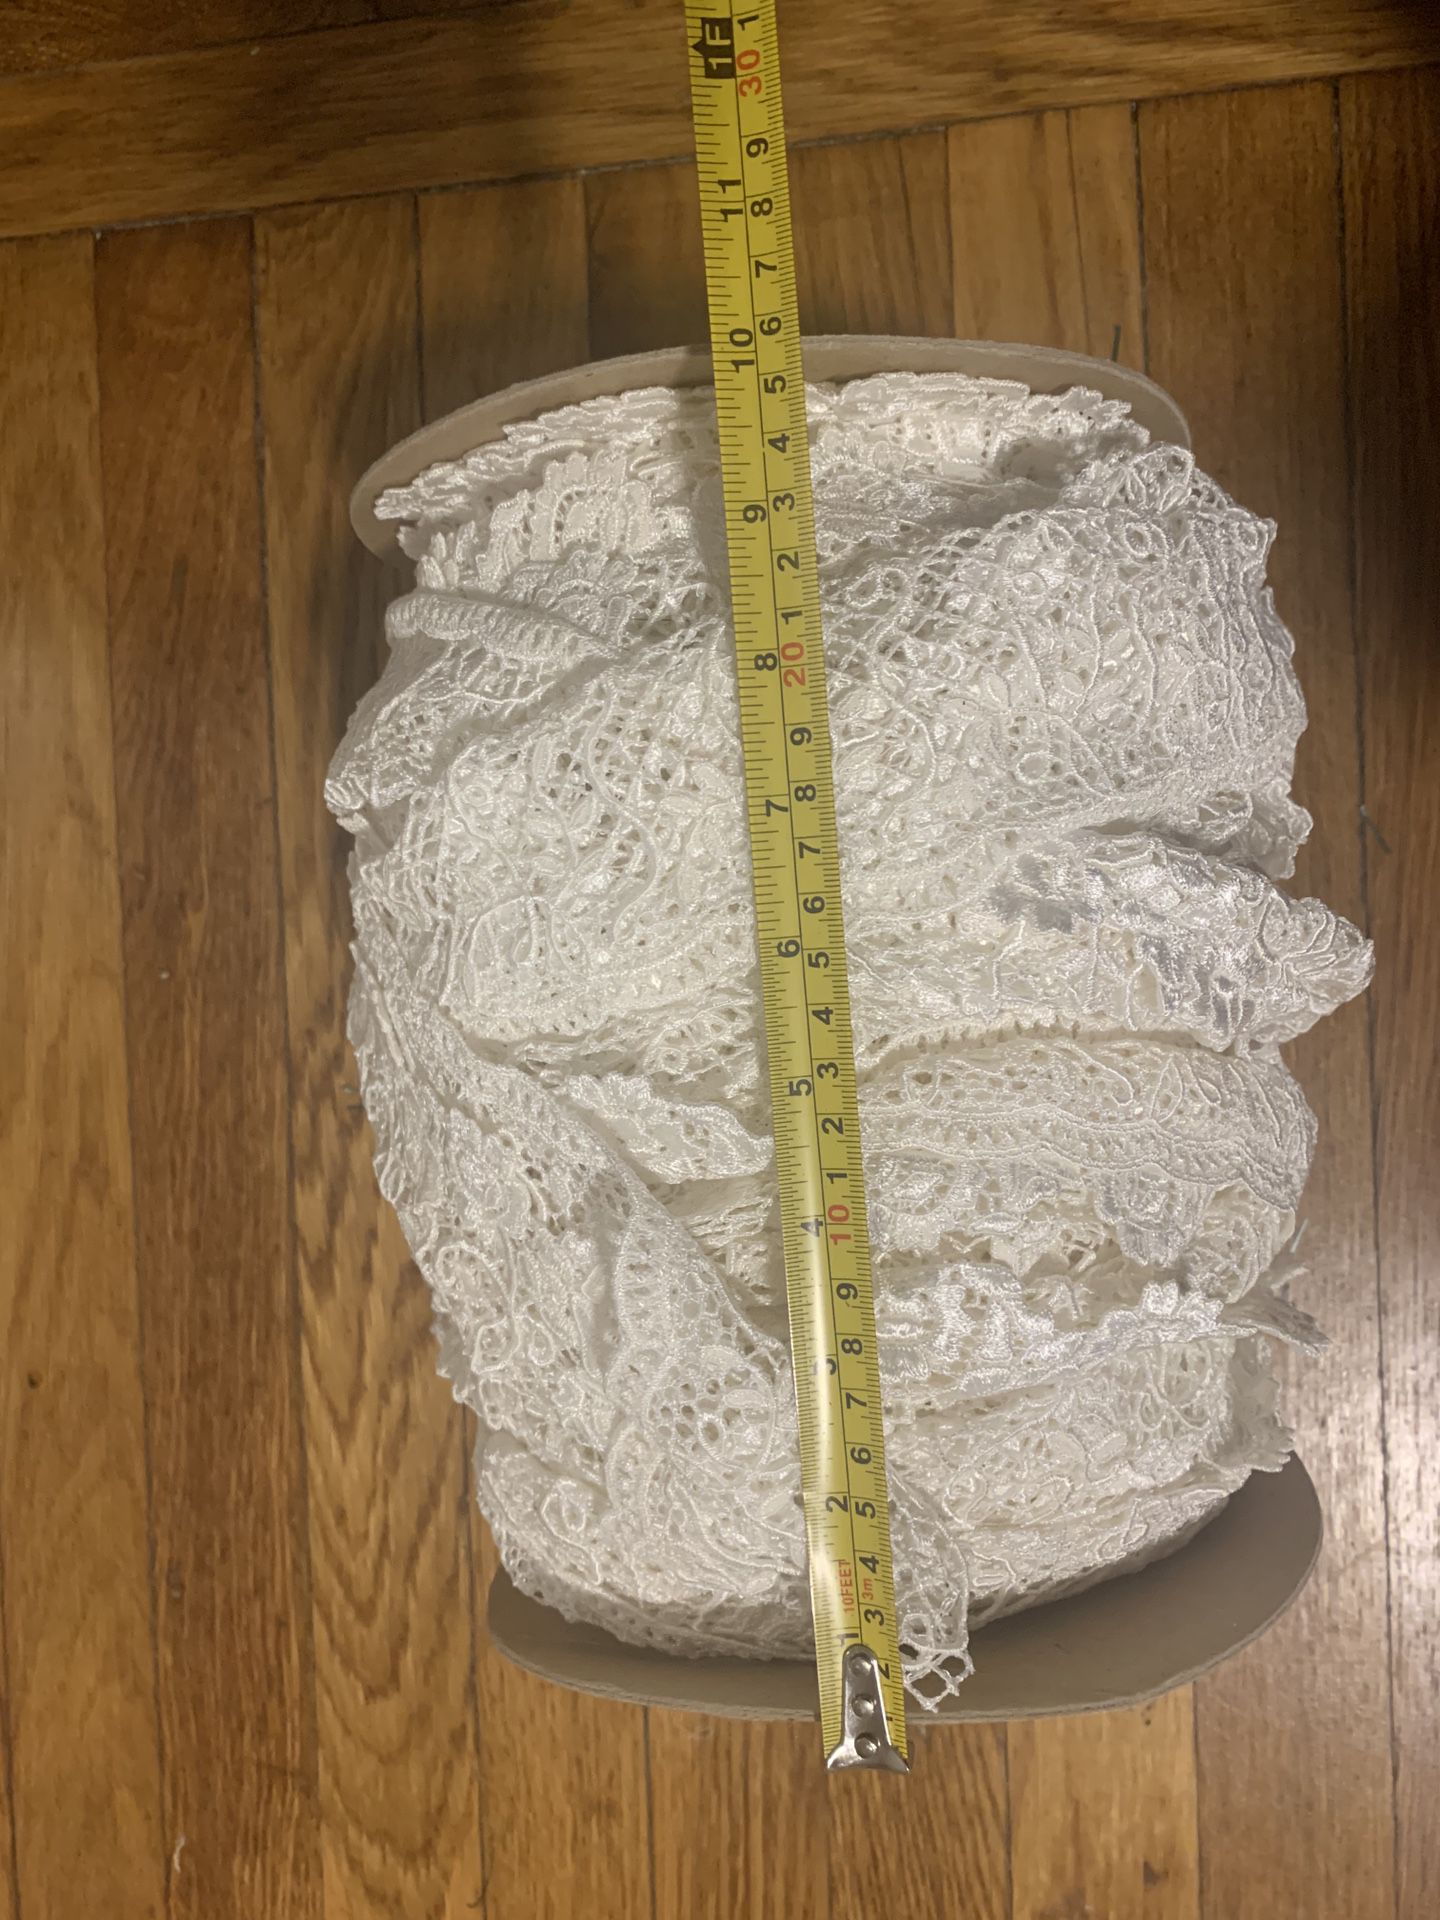 Big roll of 5” lace